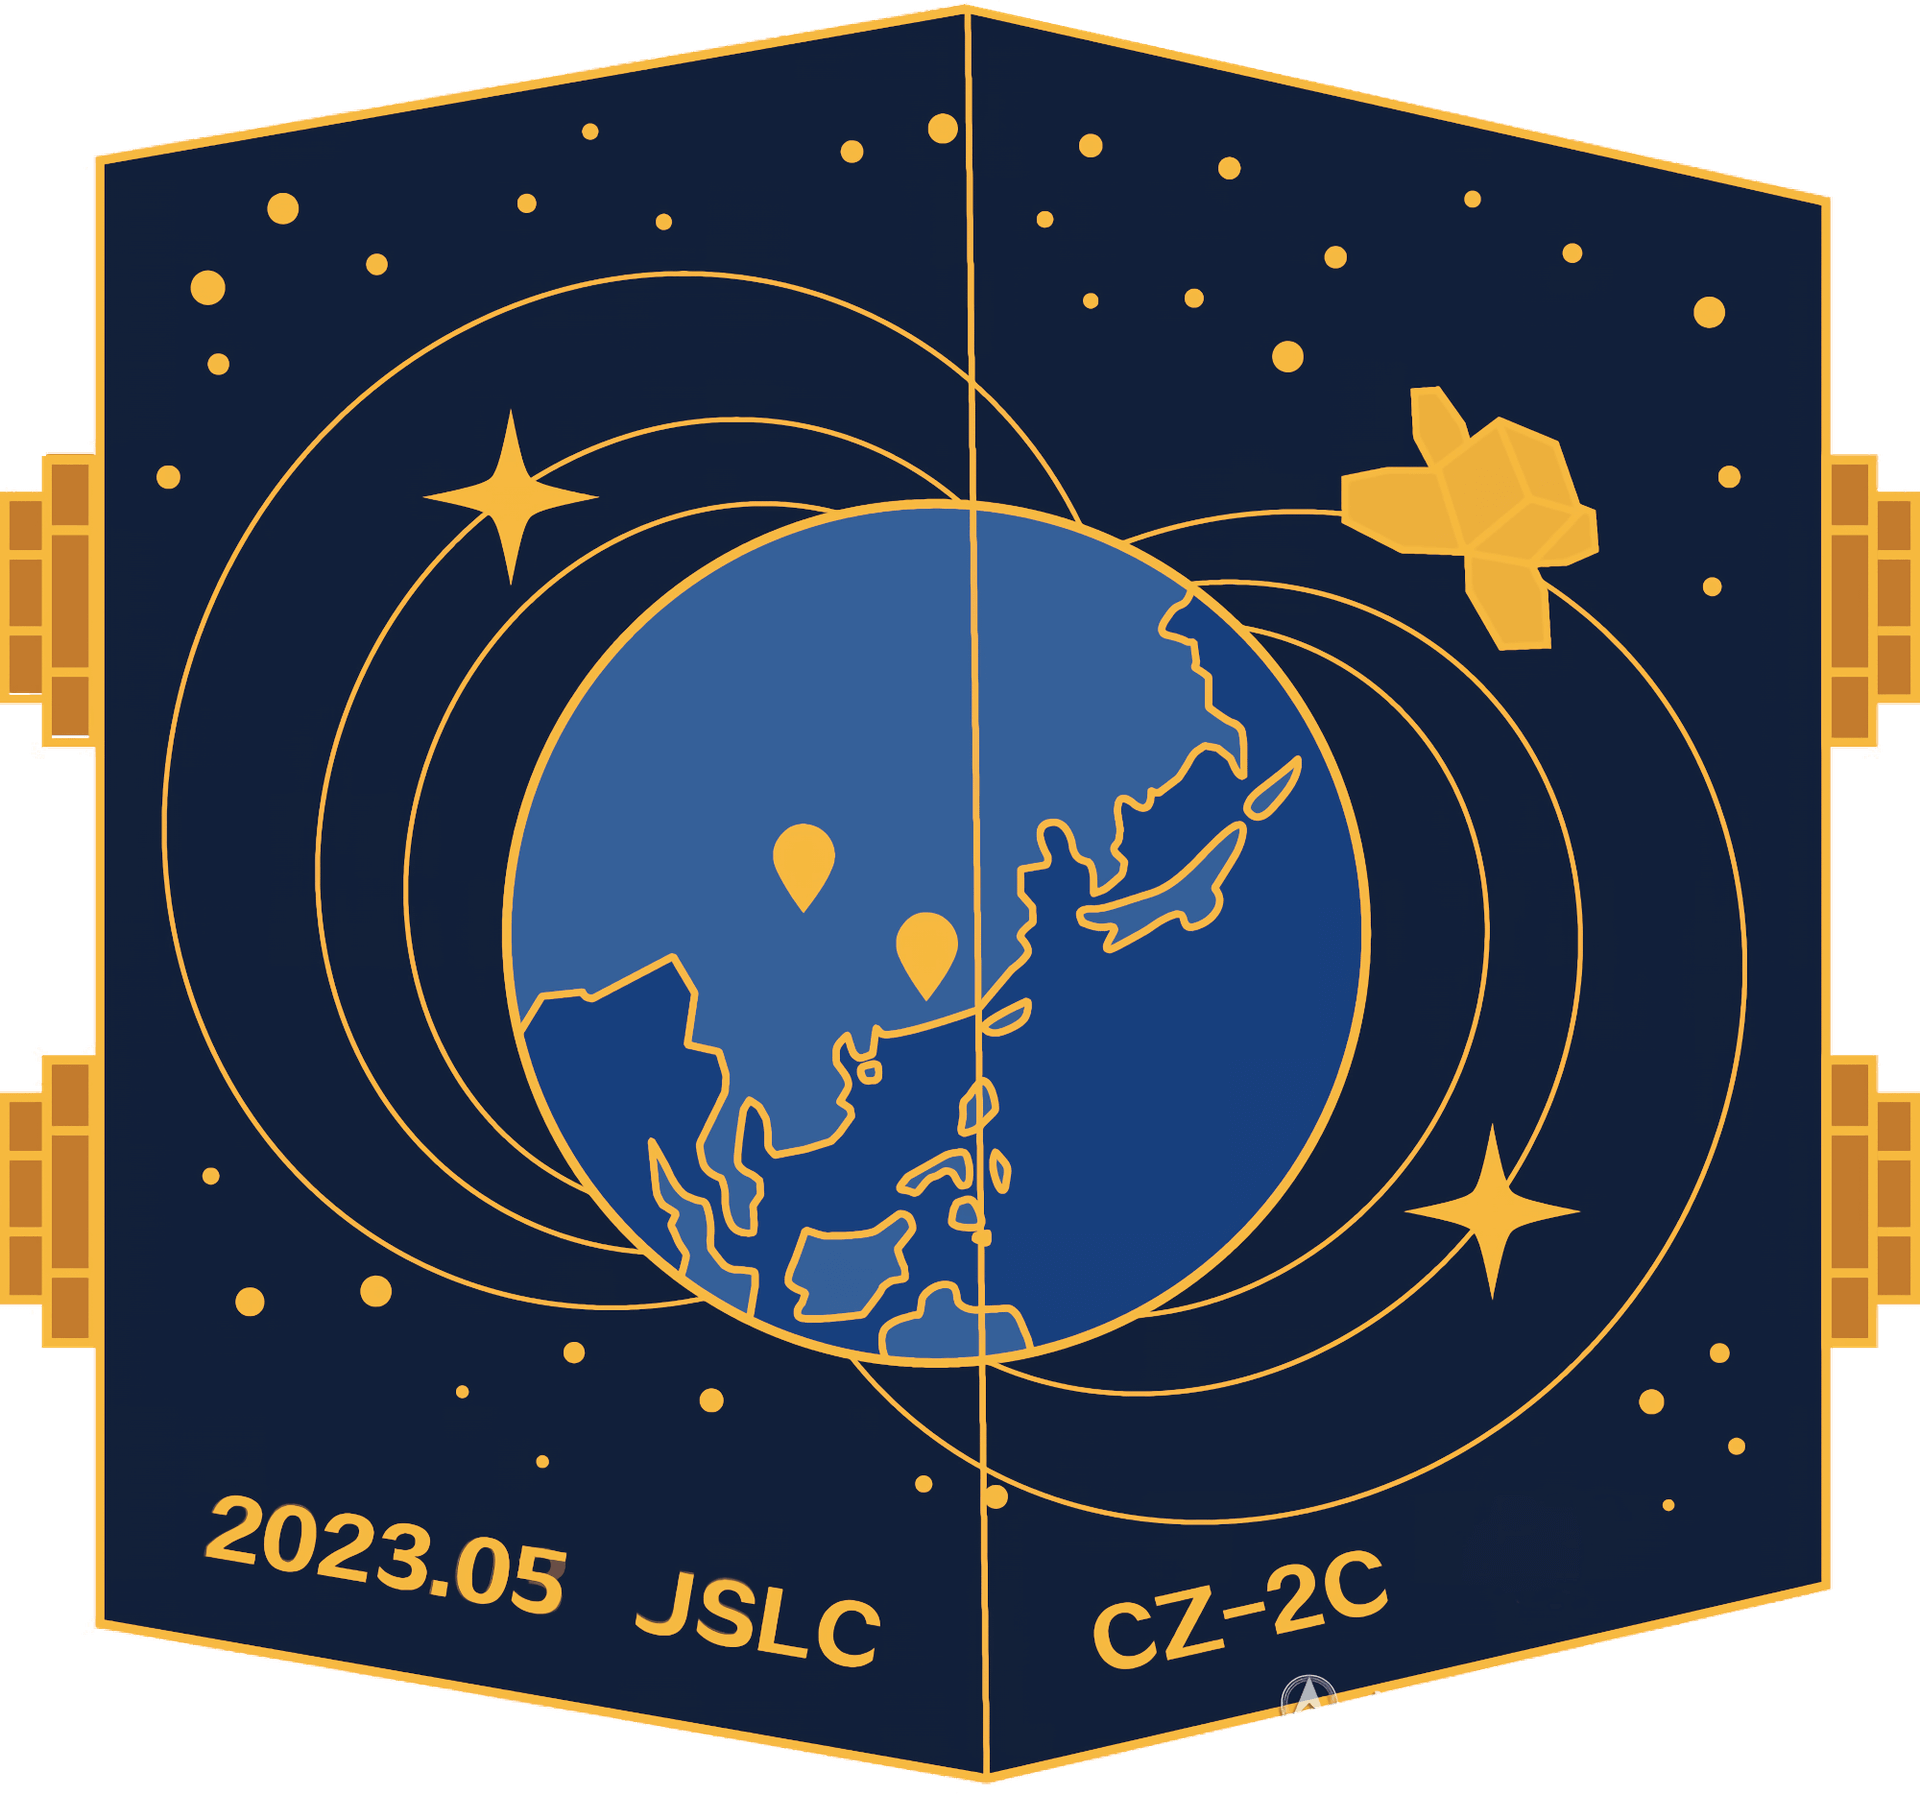 Mission patch for MUST-1A/B & Luojia-2 01